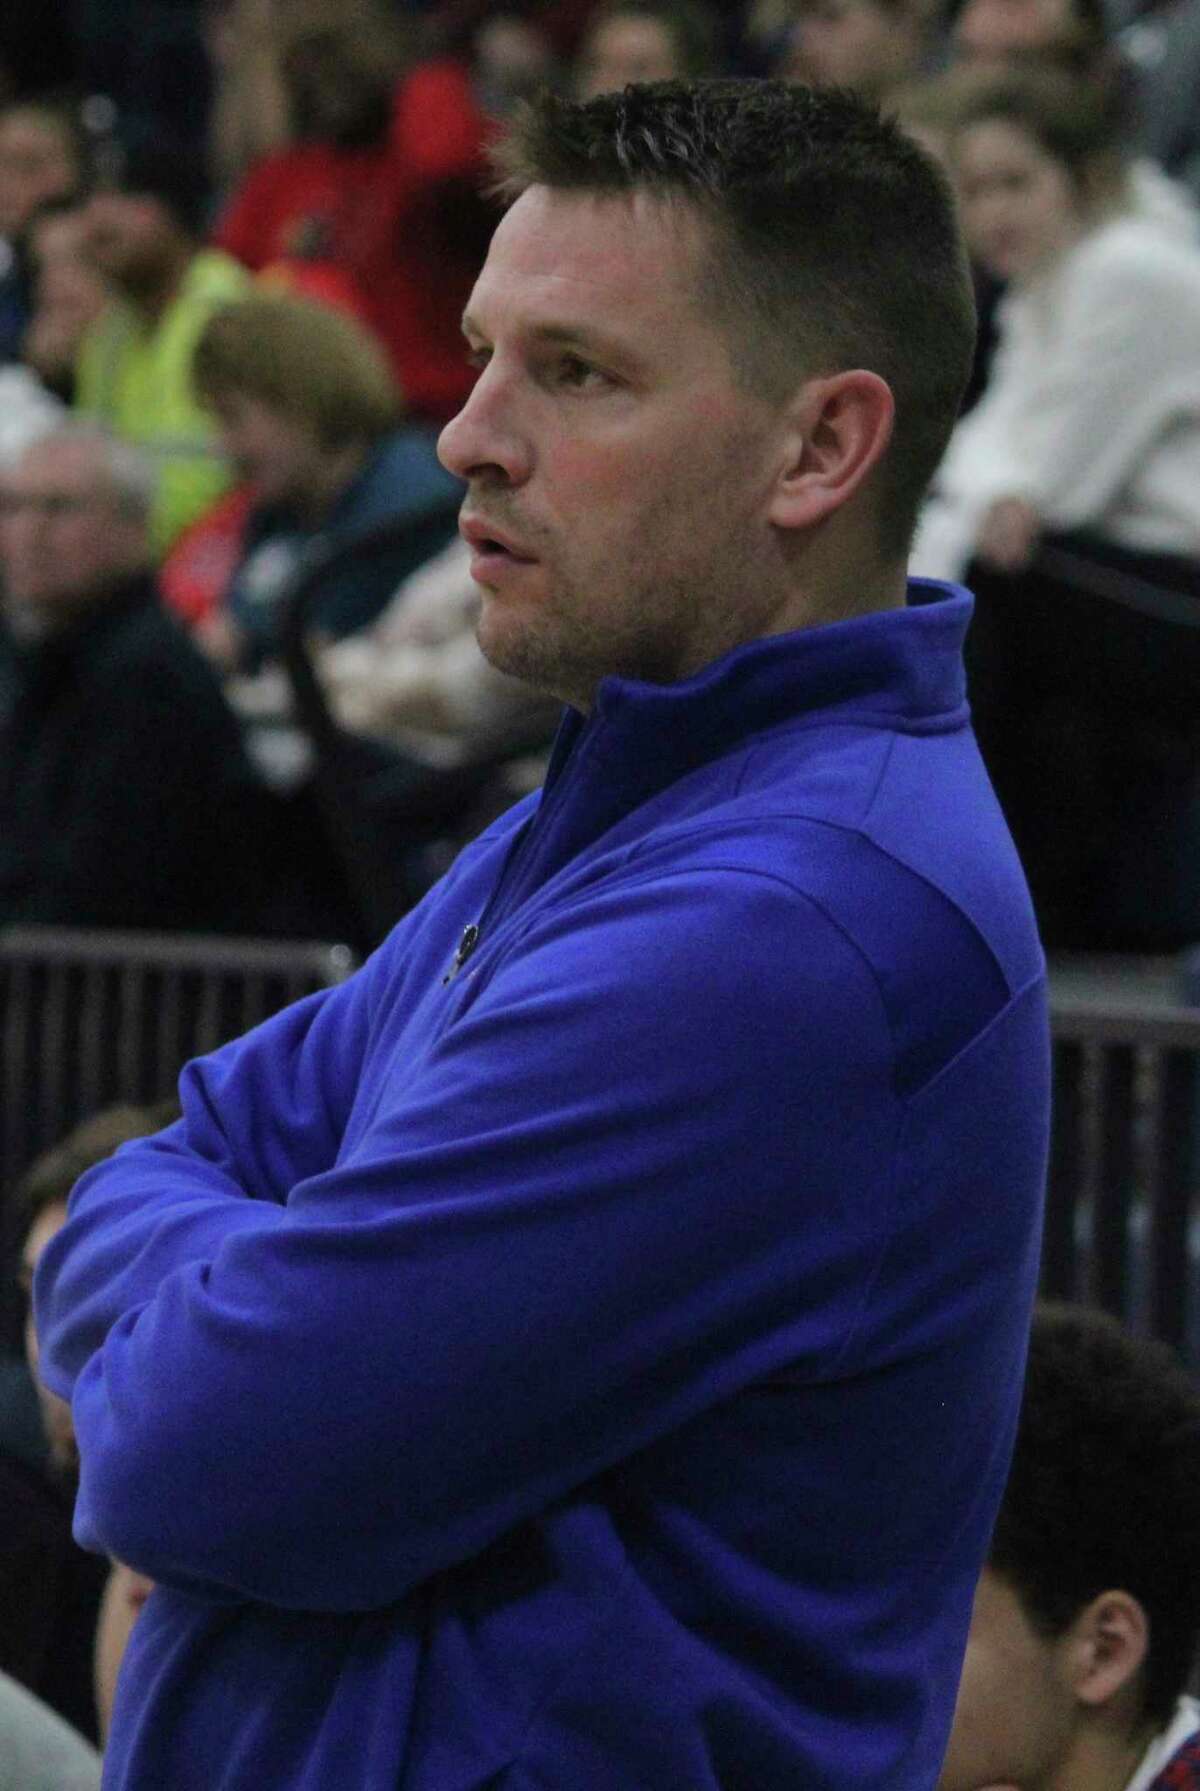 Chippewa Hills coach Zach Ingles watches the action during the regular season. (Pioneer file photo)